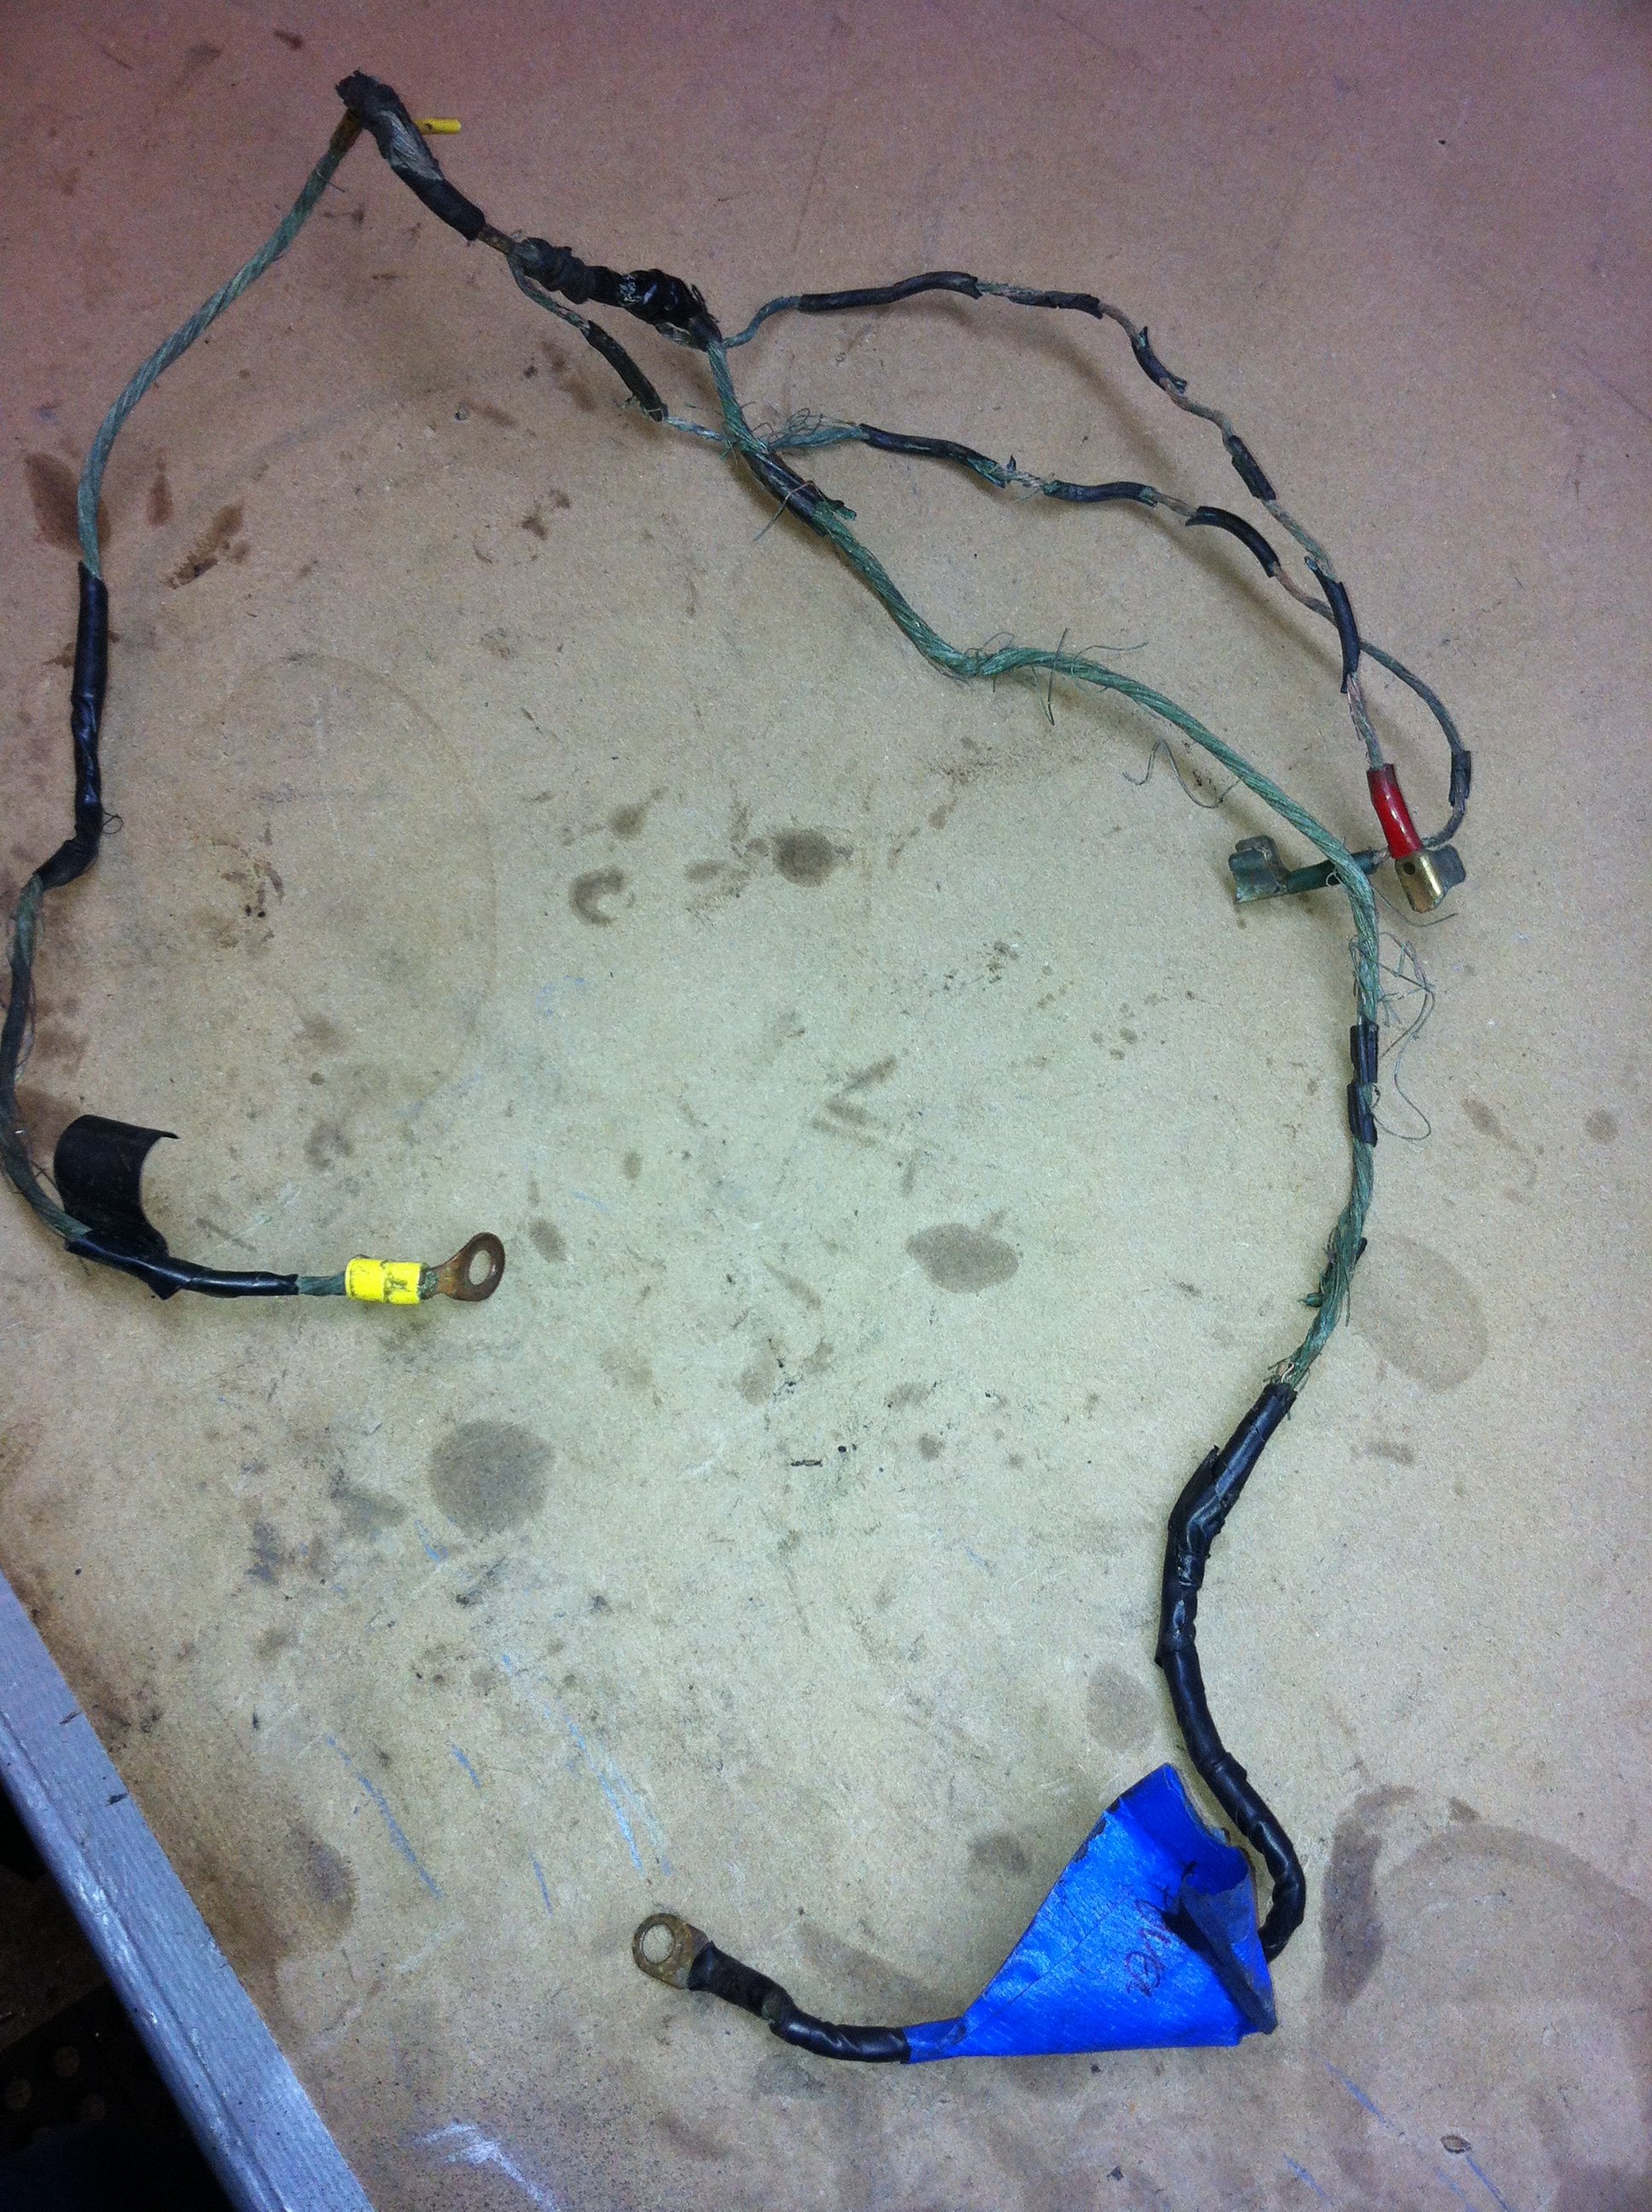 Only these wires are damaged, the other wiring appears to be relatively new and uncorroded